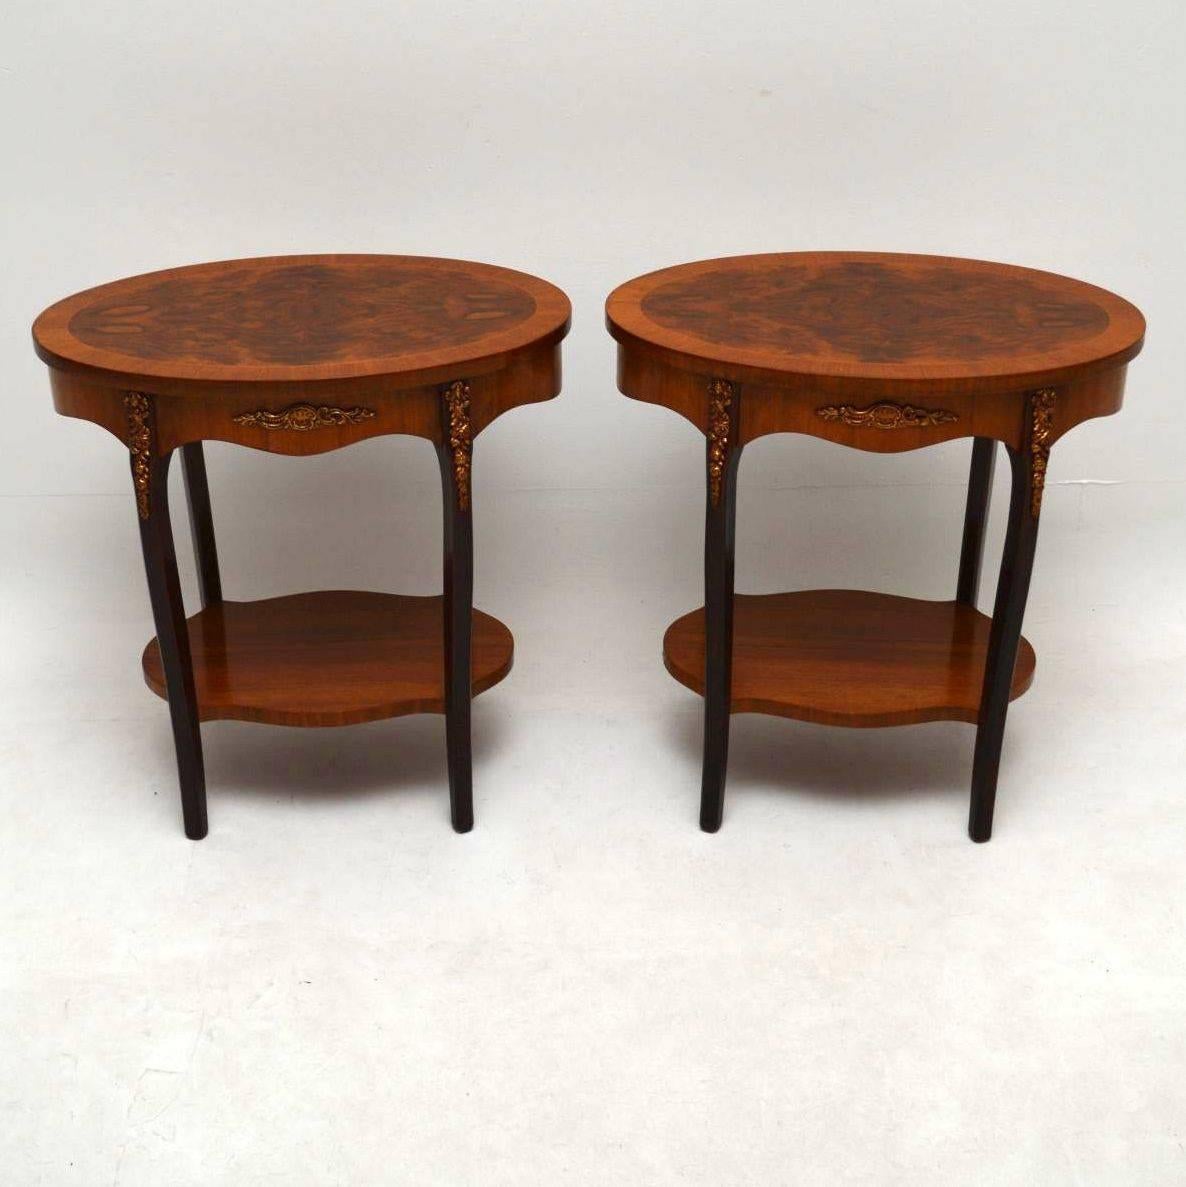 Pair of antique oval French style side tables that are the ideal height for lamp tables either side of a sofa. They are in great condition, having just been polished and I would date them to around the 1930s-1950s period. The tops are burr walnut